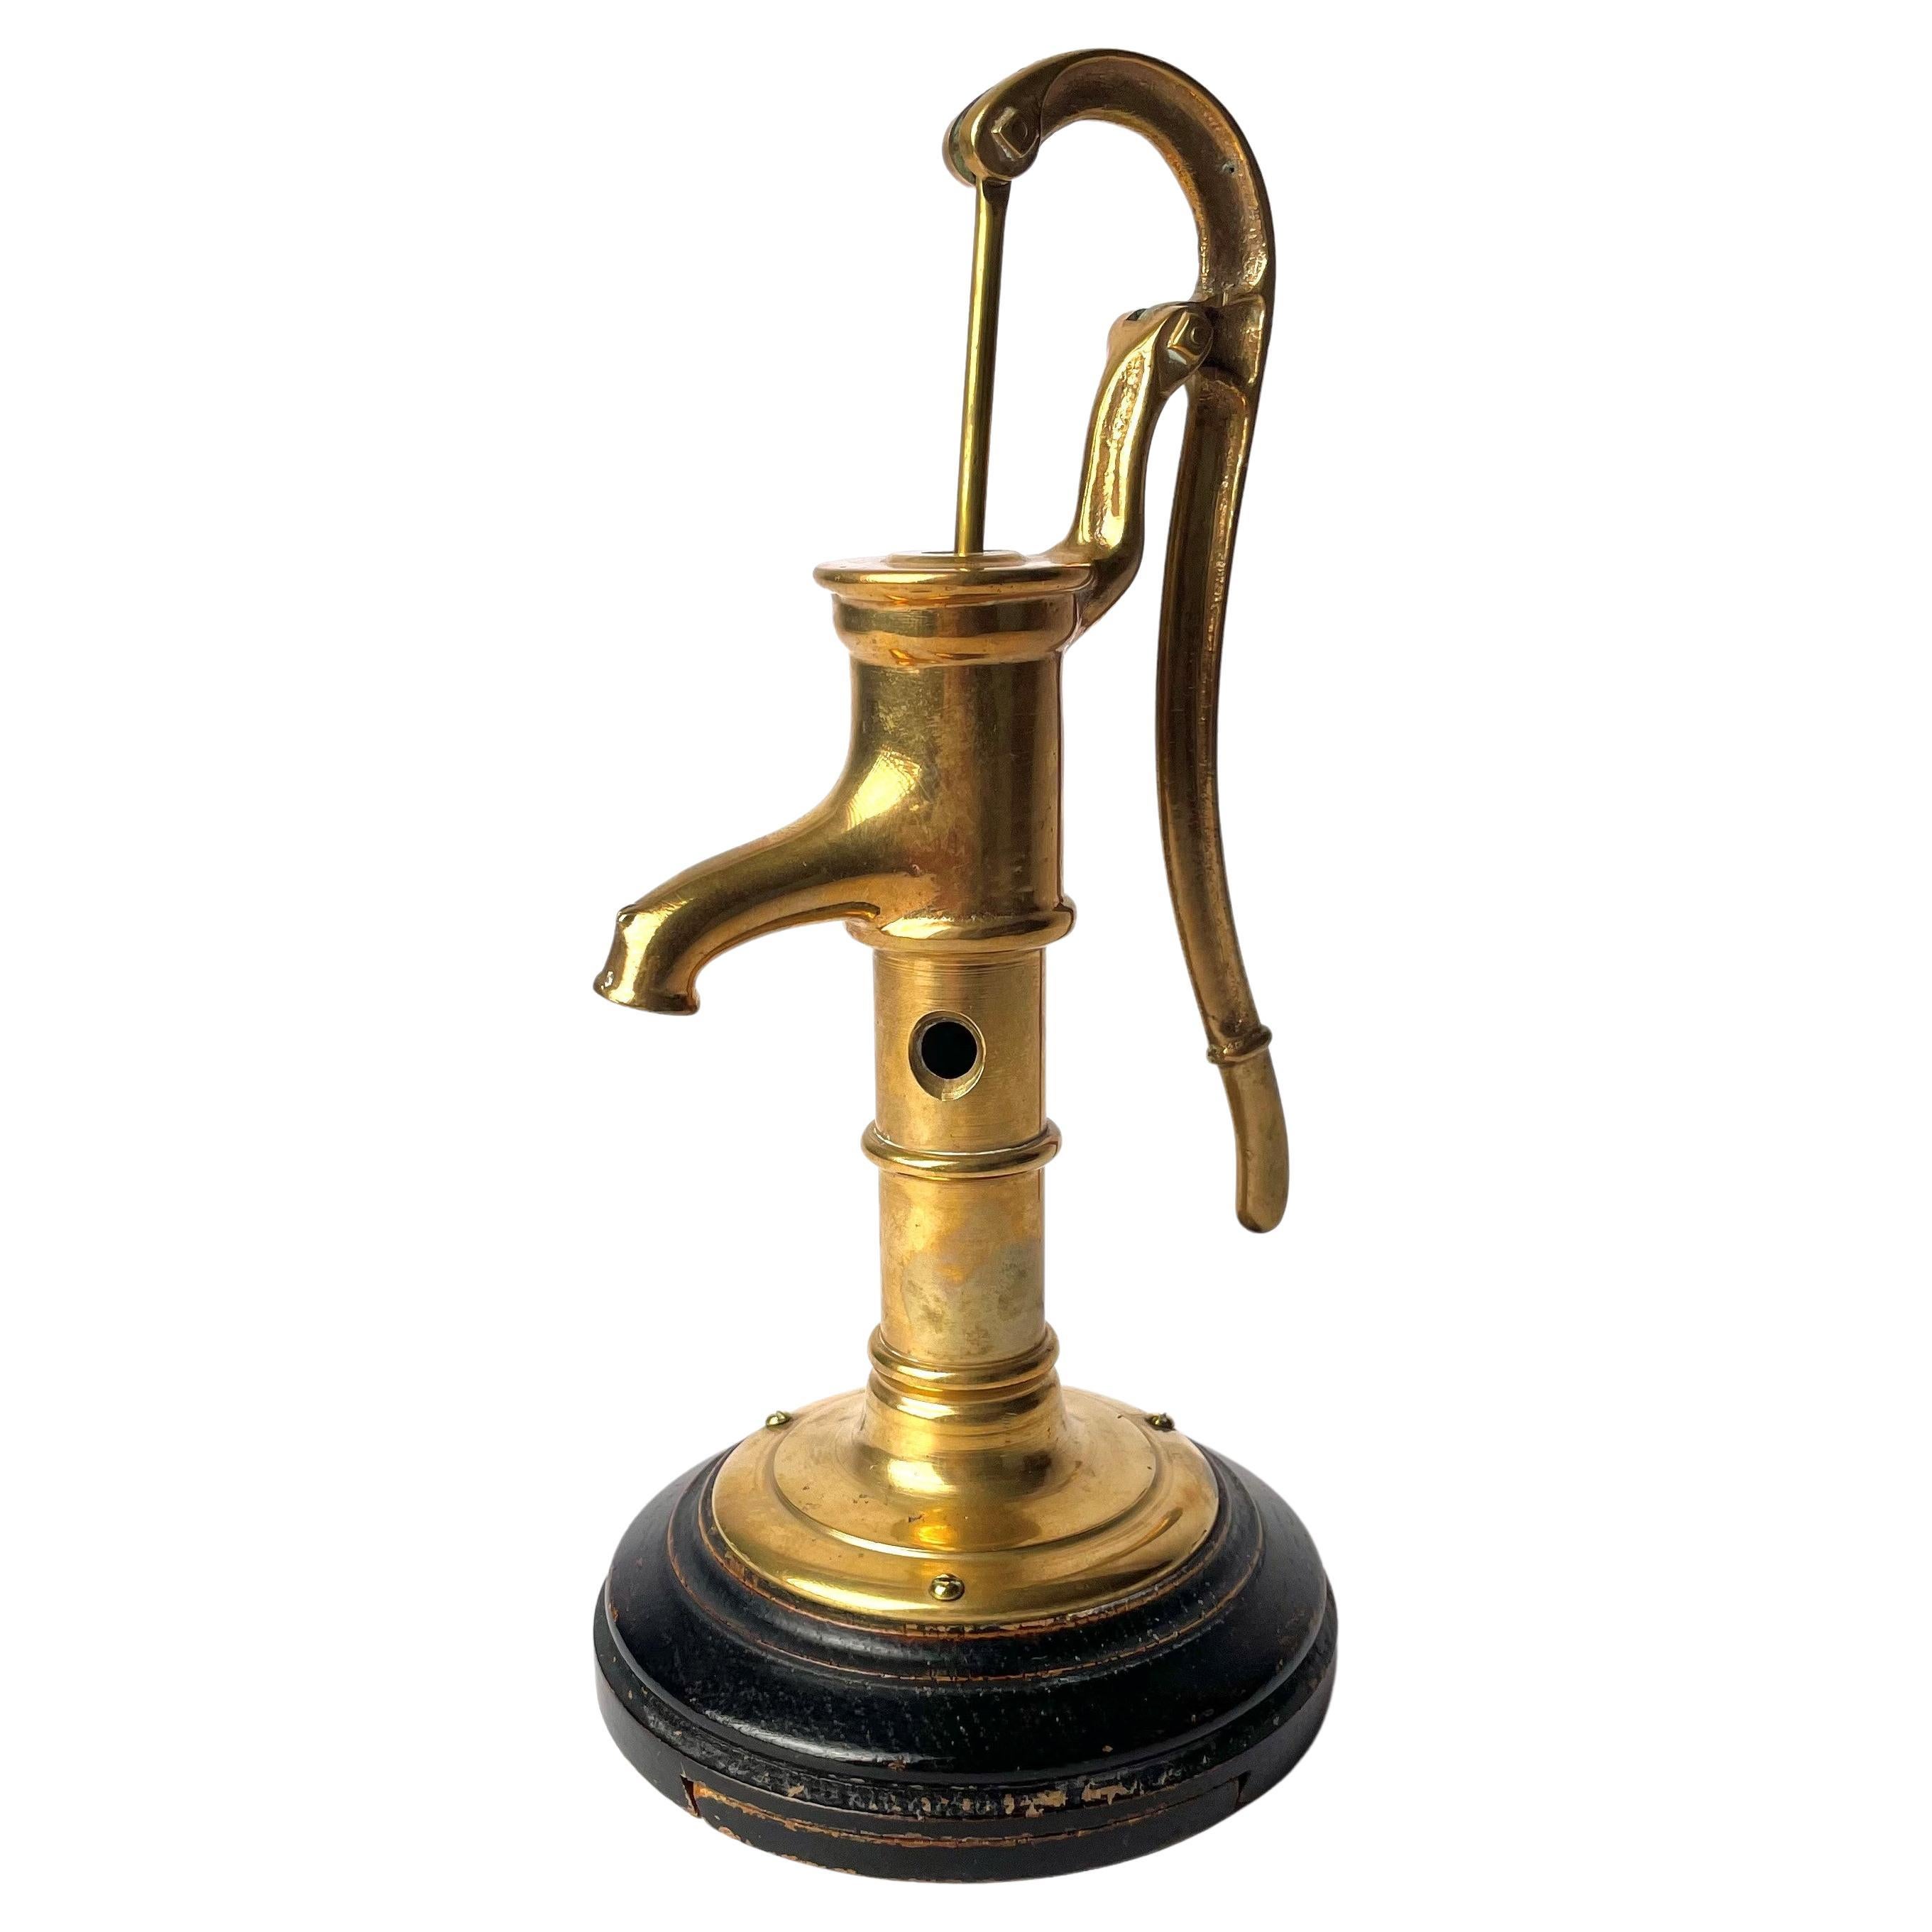 Cigar Cutter in the Shape of a Pitcher Pump, Brass, Early 20th Century